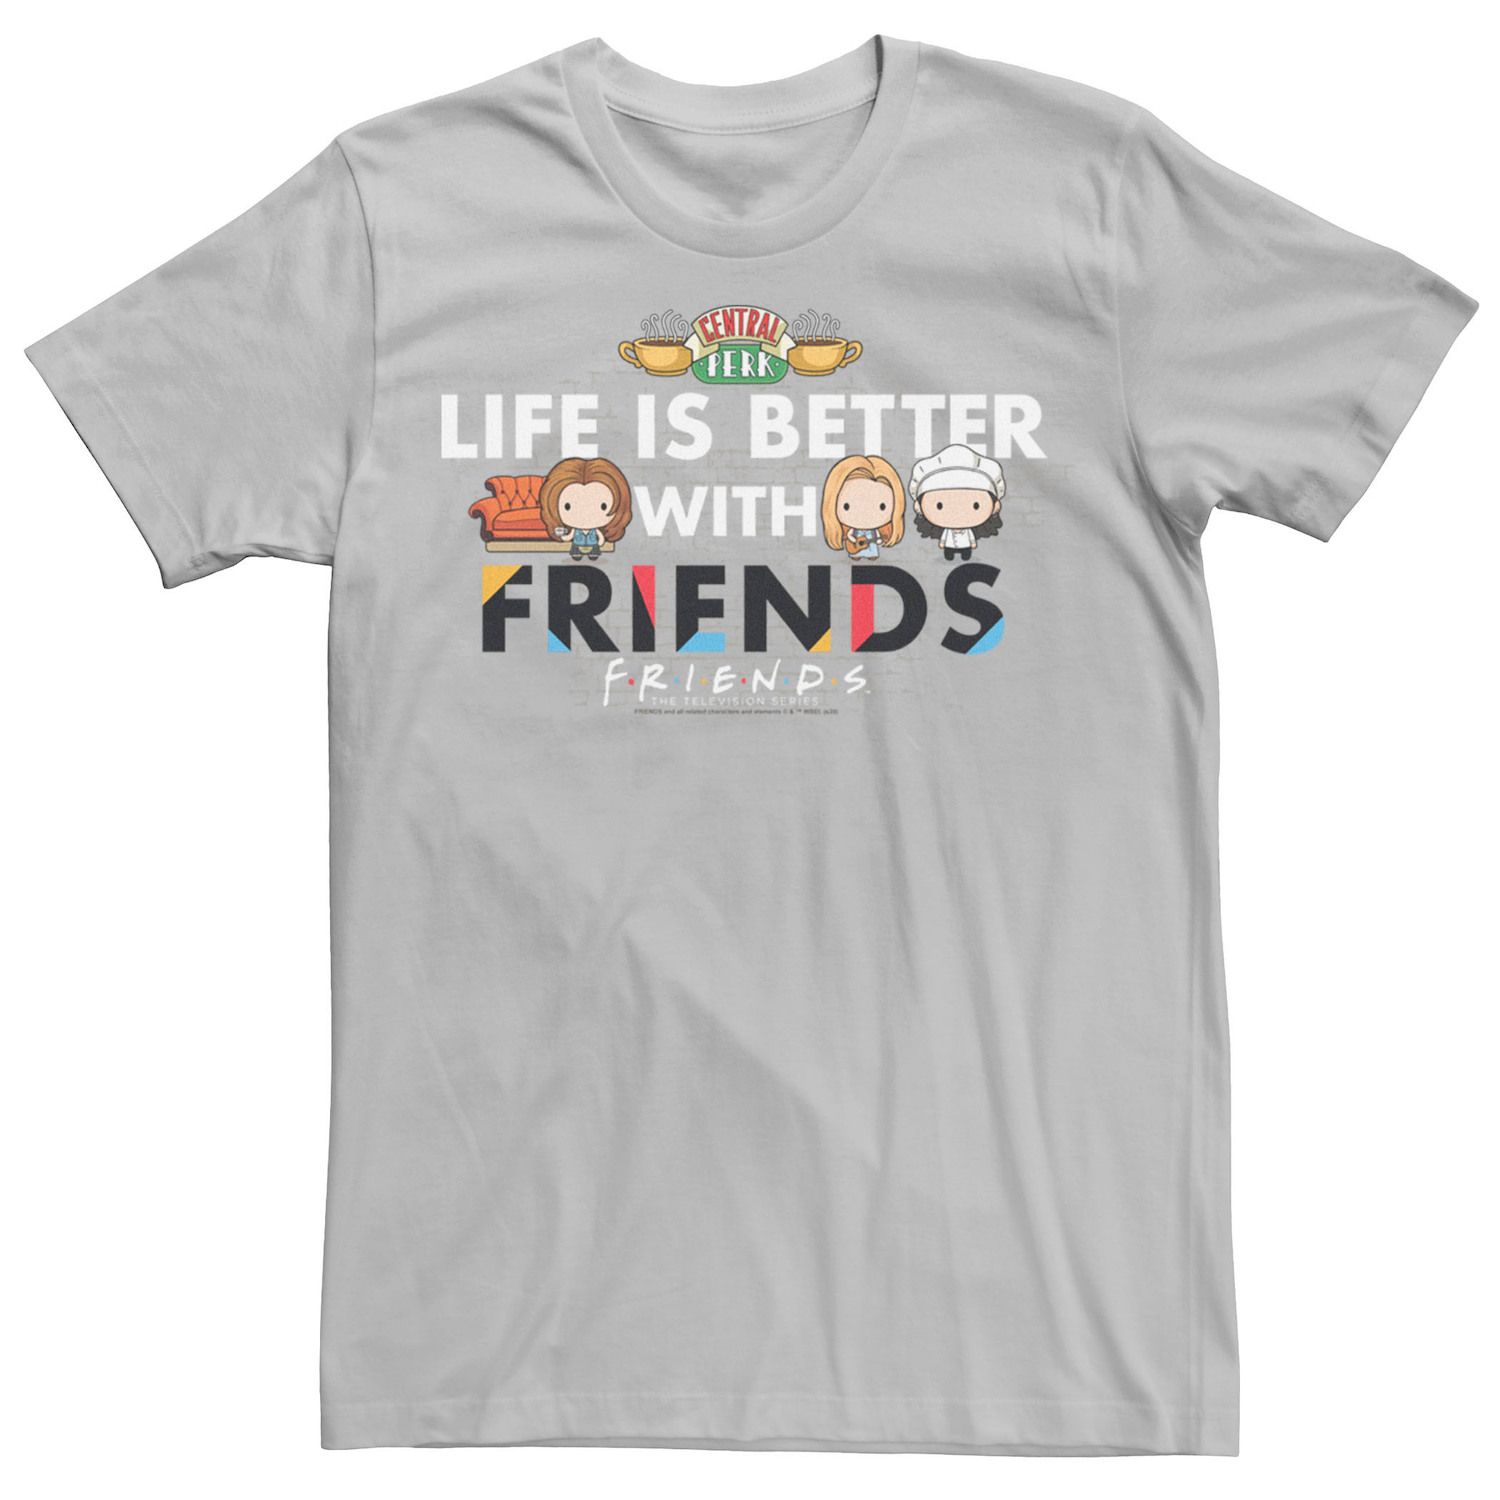 FRIENDS (TV Show) - Exclusive Friends merchandise is available for purchase  at the Central Perk pop-up shop marking the 20th anniversary of Warner  Bros. Television's Friends. (©2014 WBEI. All Rights Reserved.)